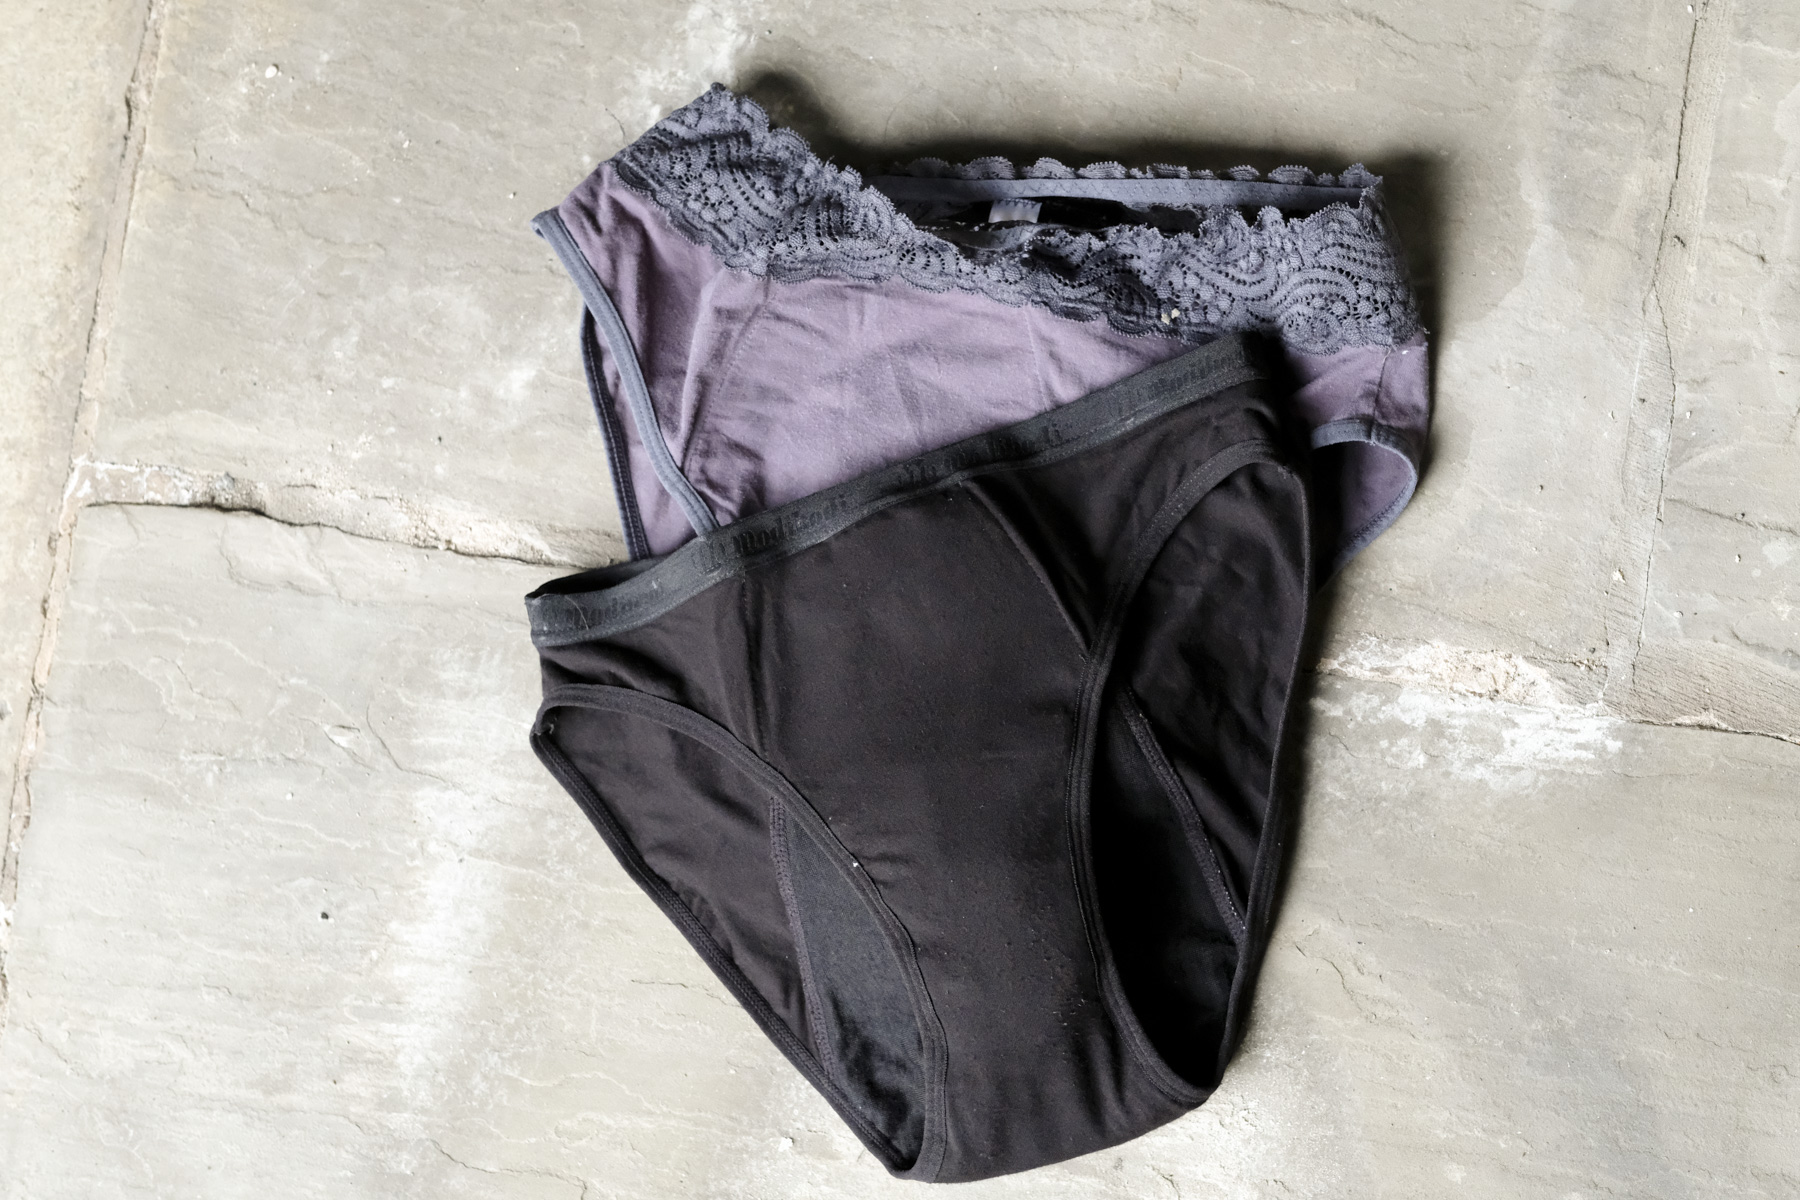 How to Properly Wash Period Underwear - The Brand hannah